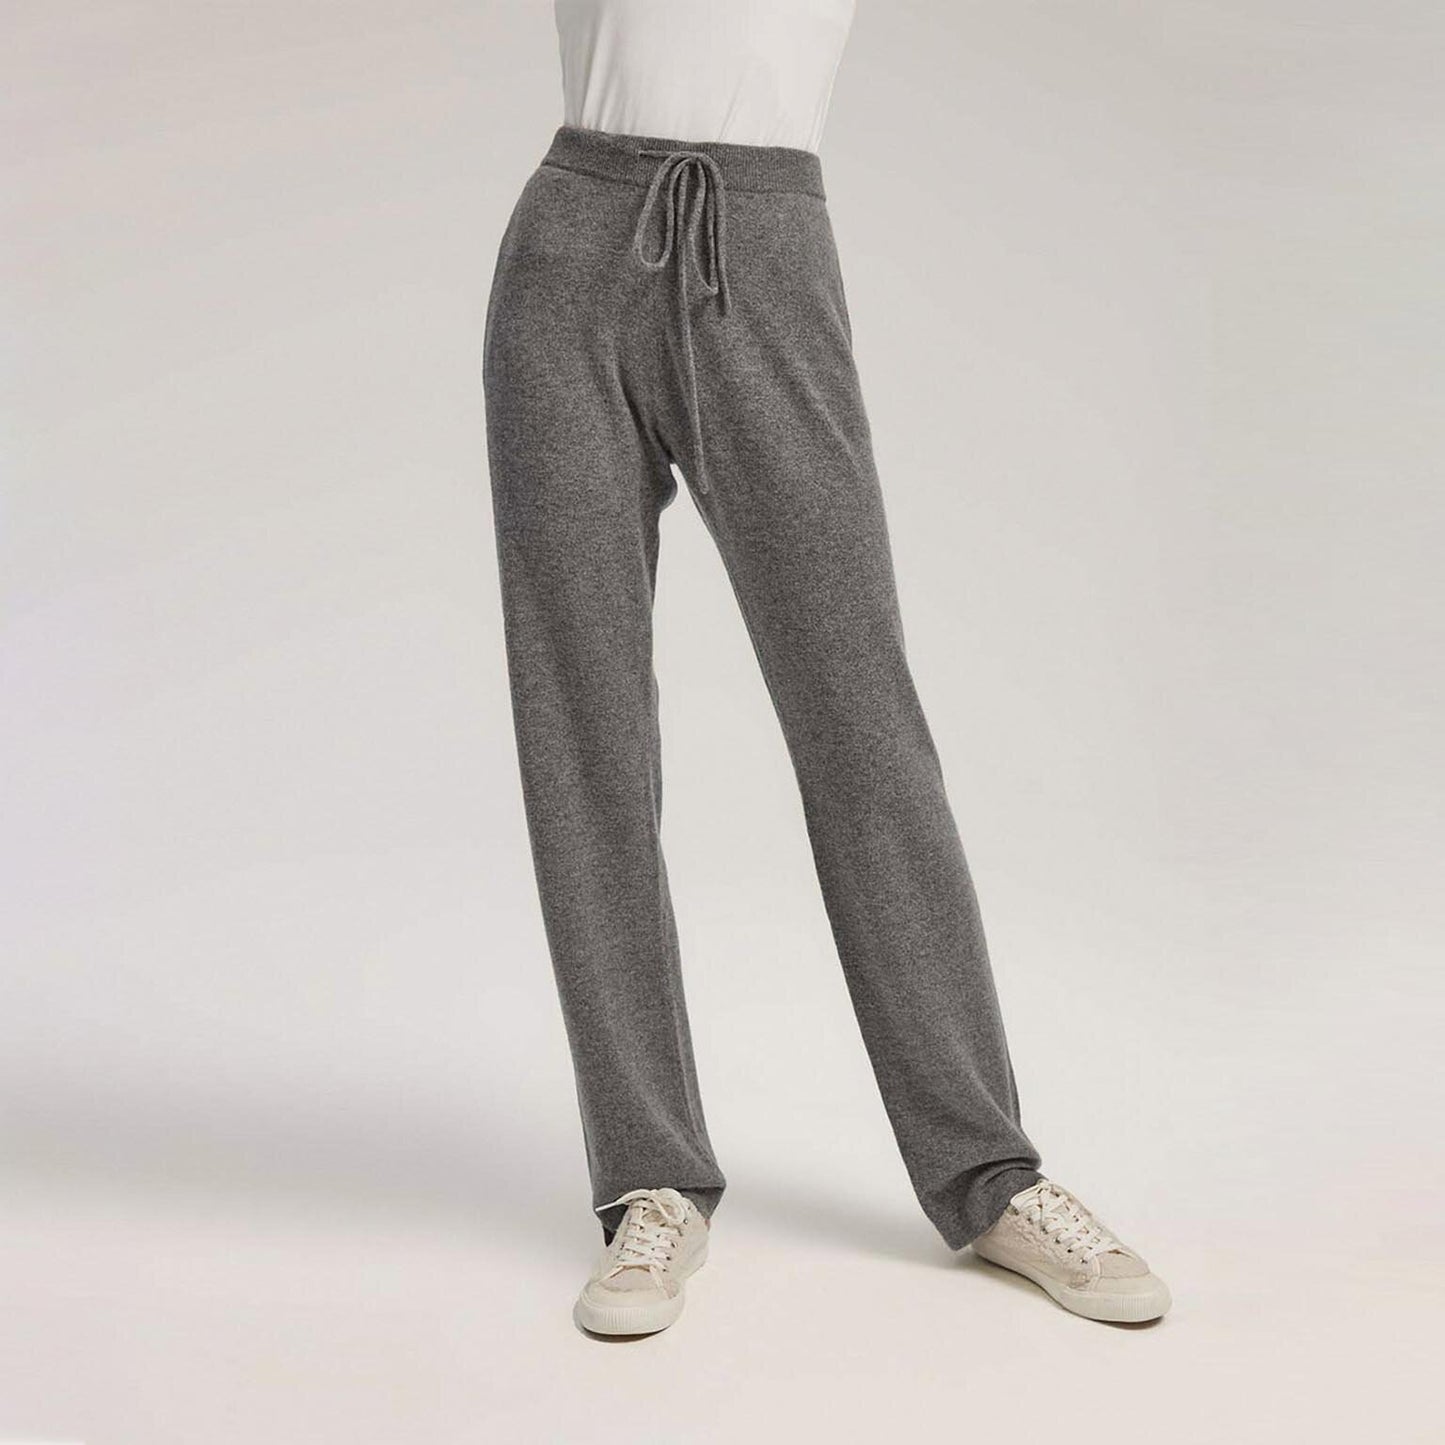 nwt willi smith 100% cashmere high rise lounge pants - size small